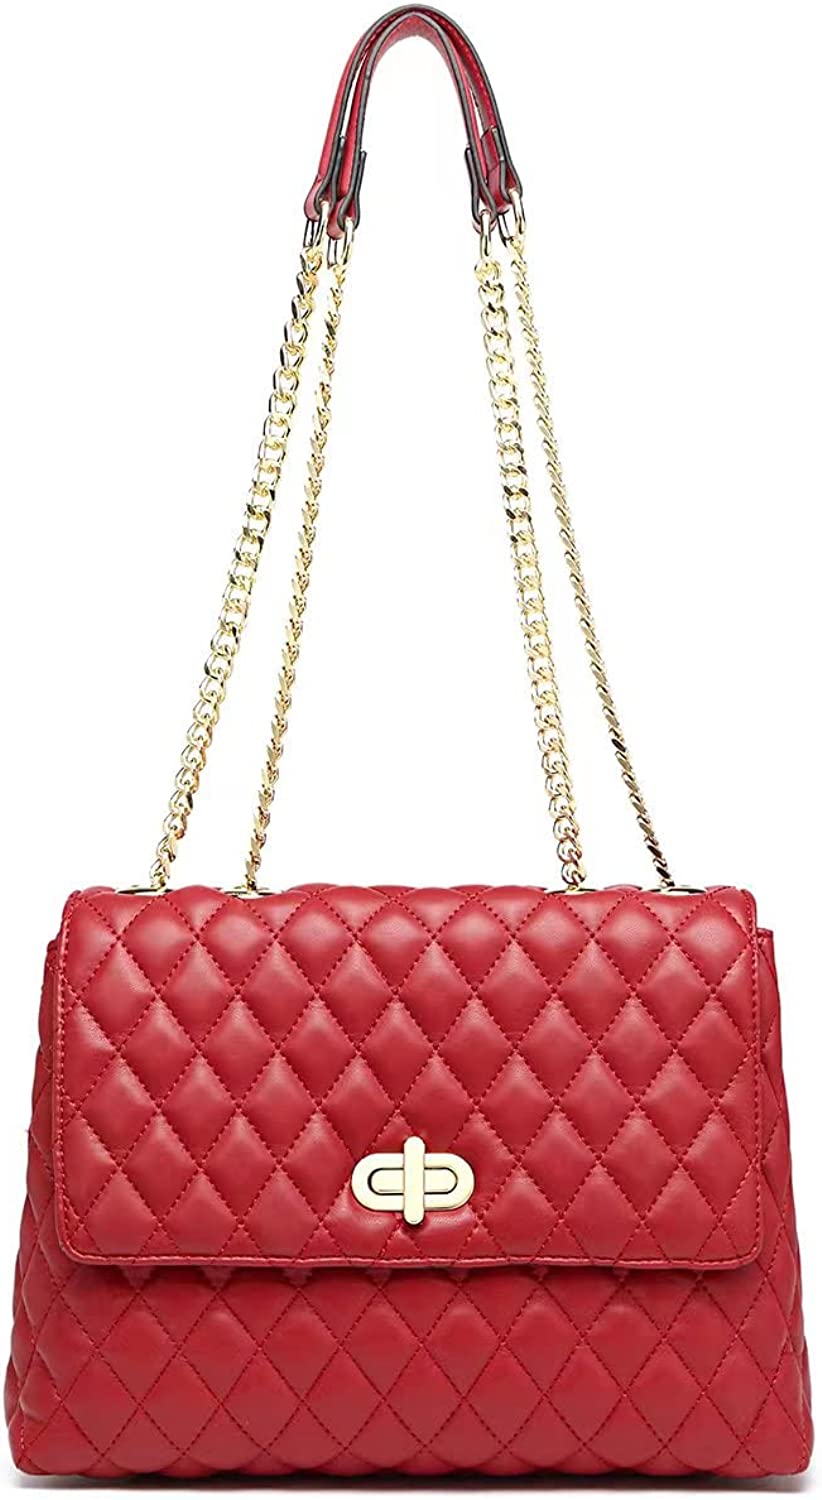 ER.Roulour Quilted Crossbody Bags for Women, Trendy Roomy Chain Purses  Leather Handbags with Flap Gold Hardware Shoulder Bag: Handbags